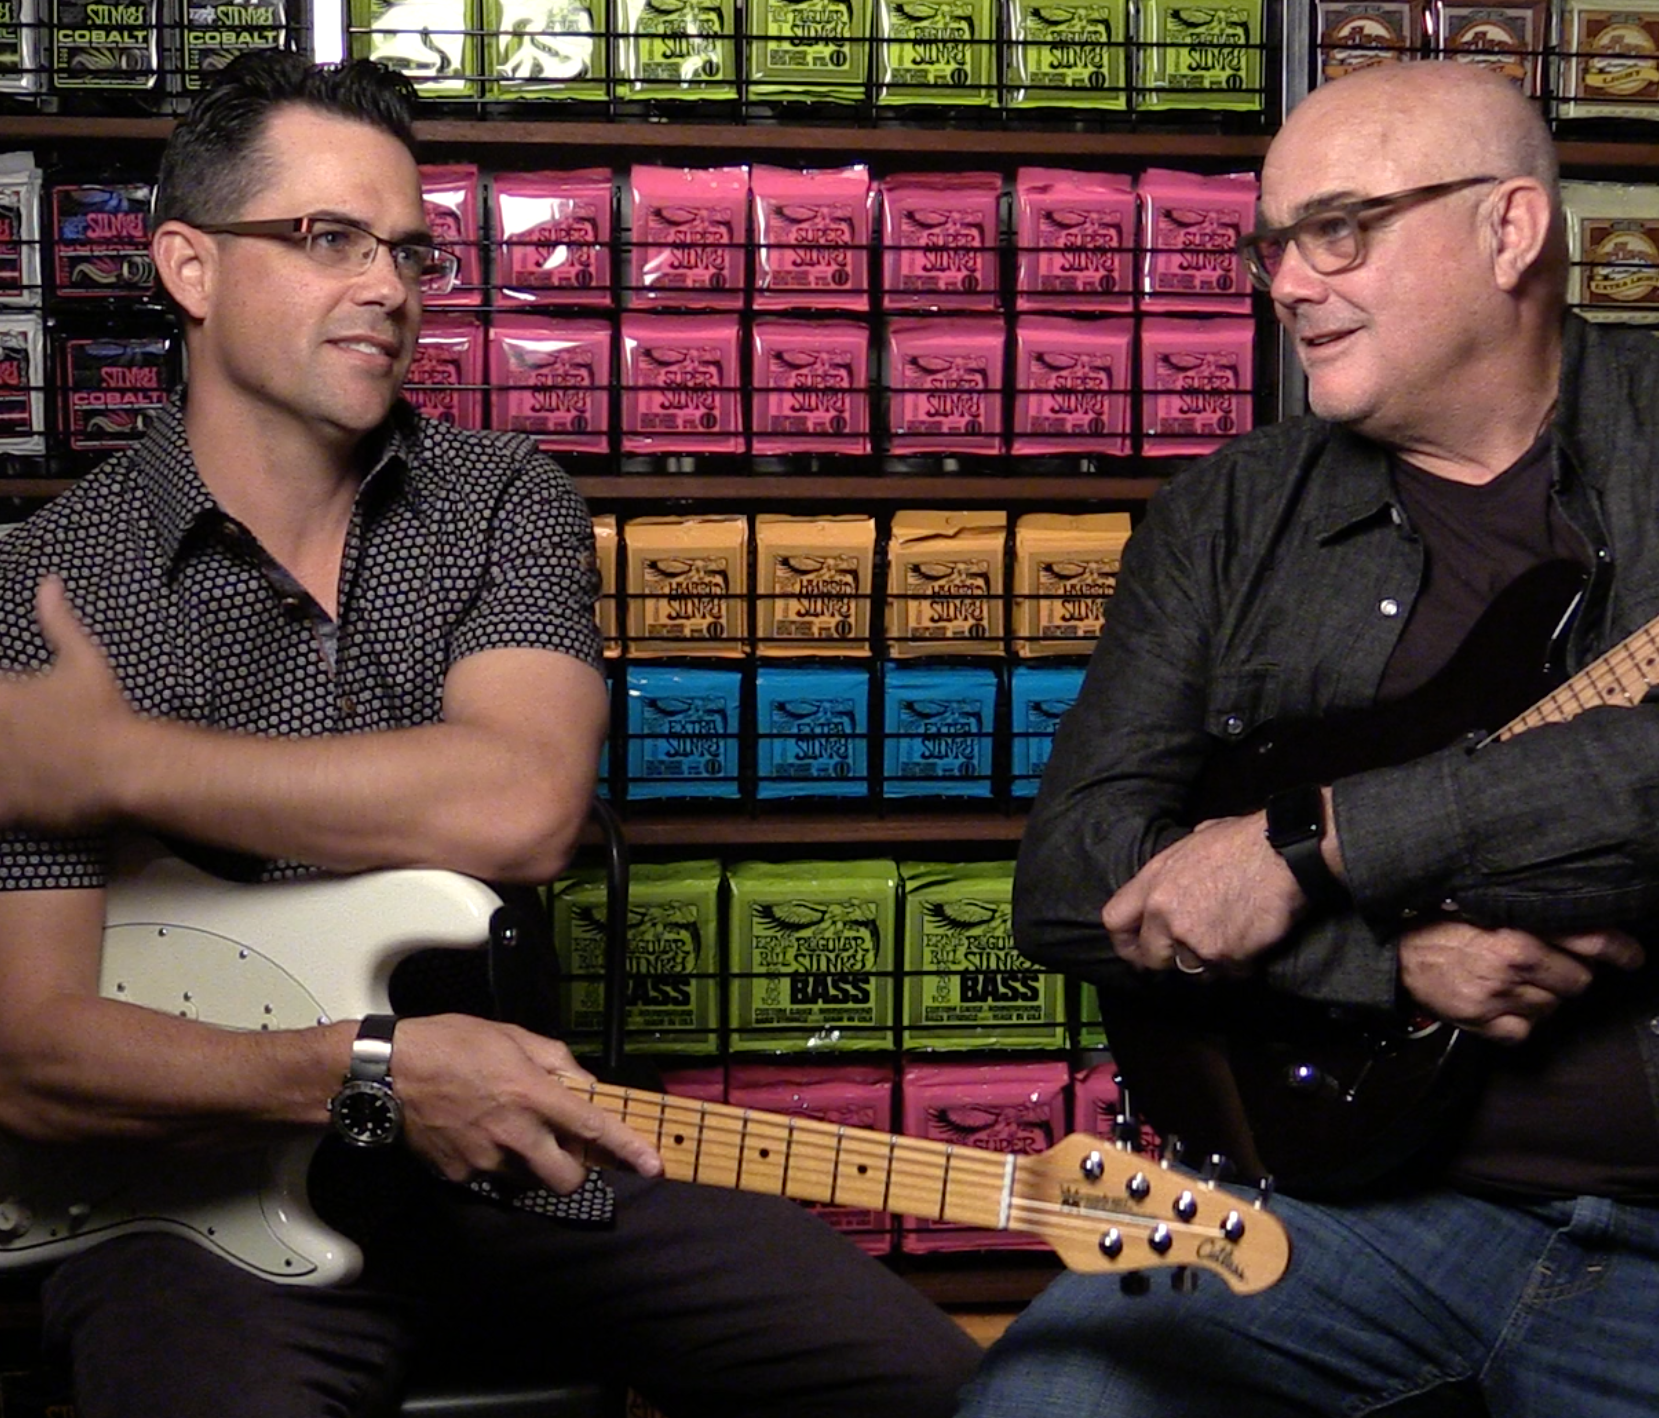 Brian Ball and father Sterling Ball, who run the Ernie Ball guitar company, in an interview.